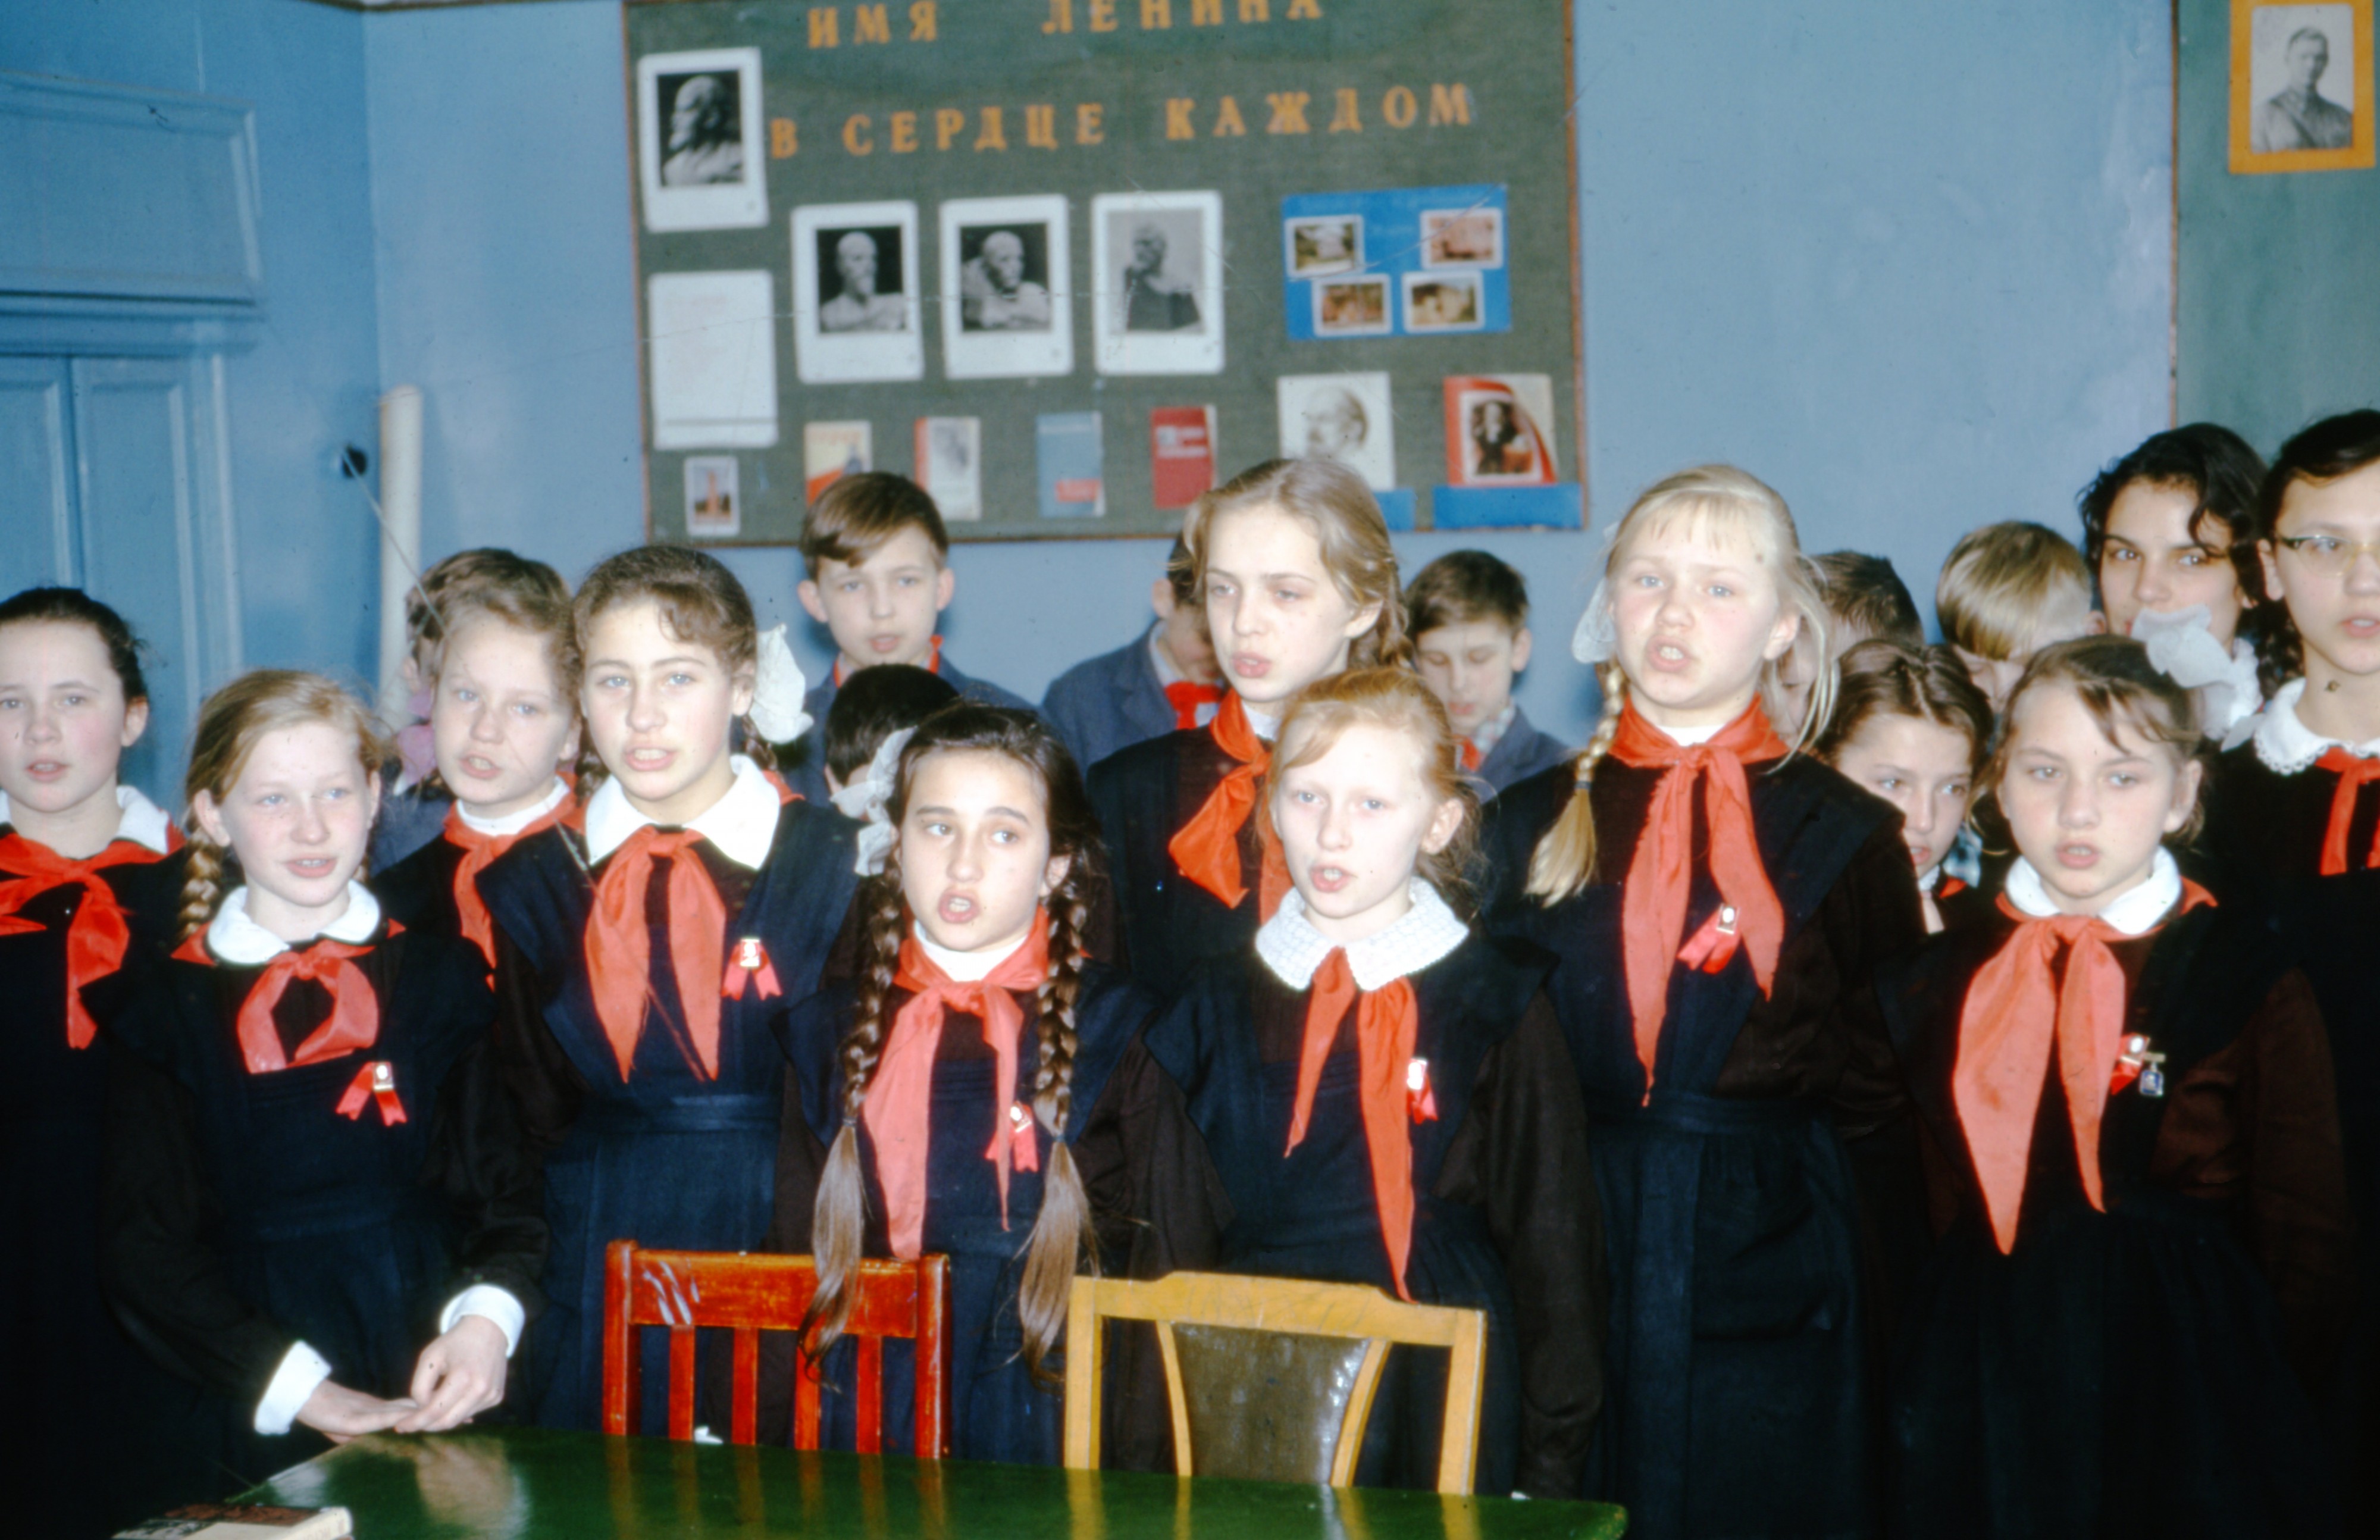 Students in Class 1964 Moscow